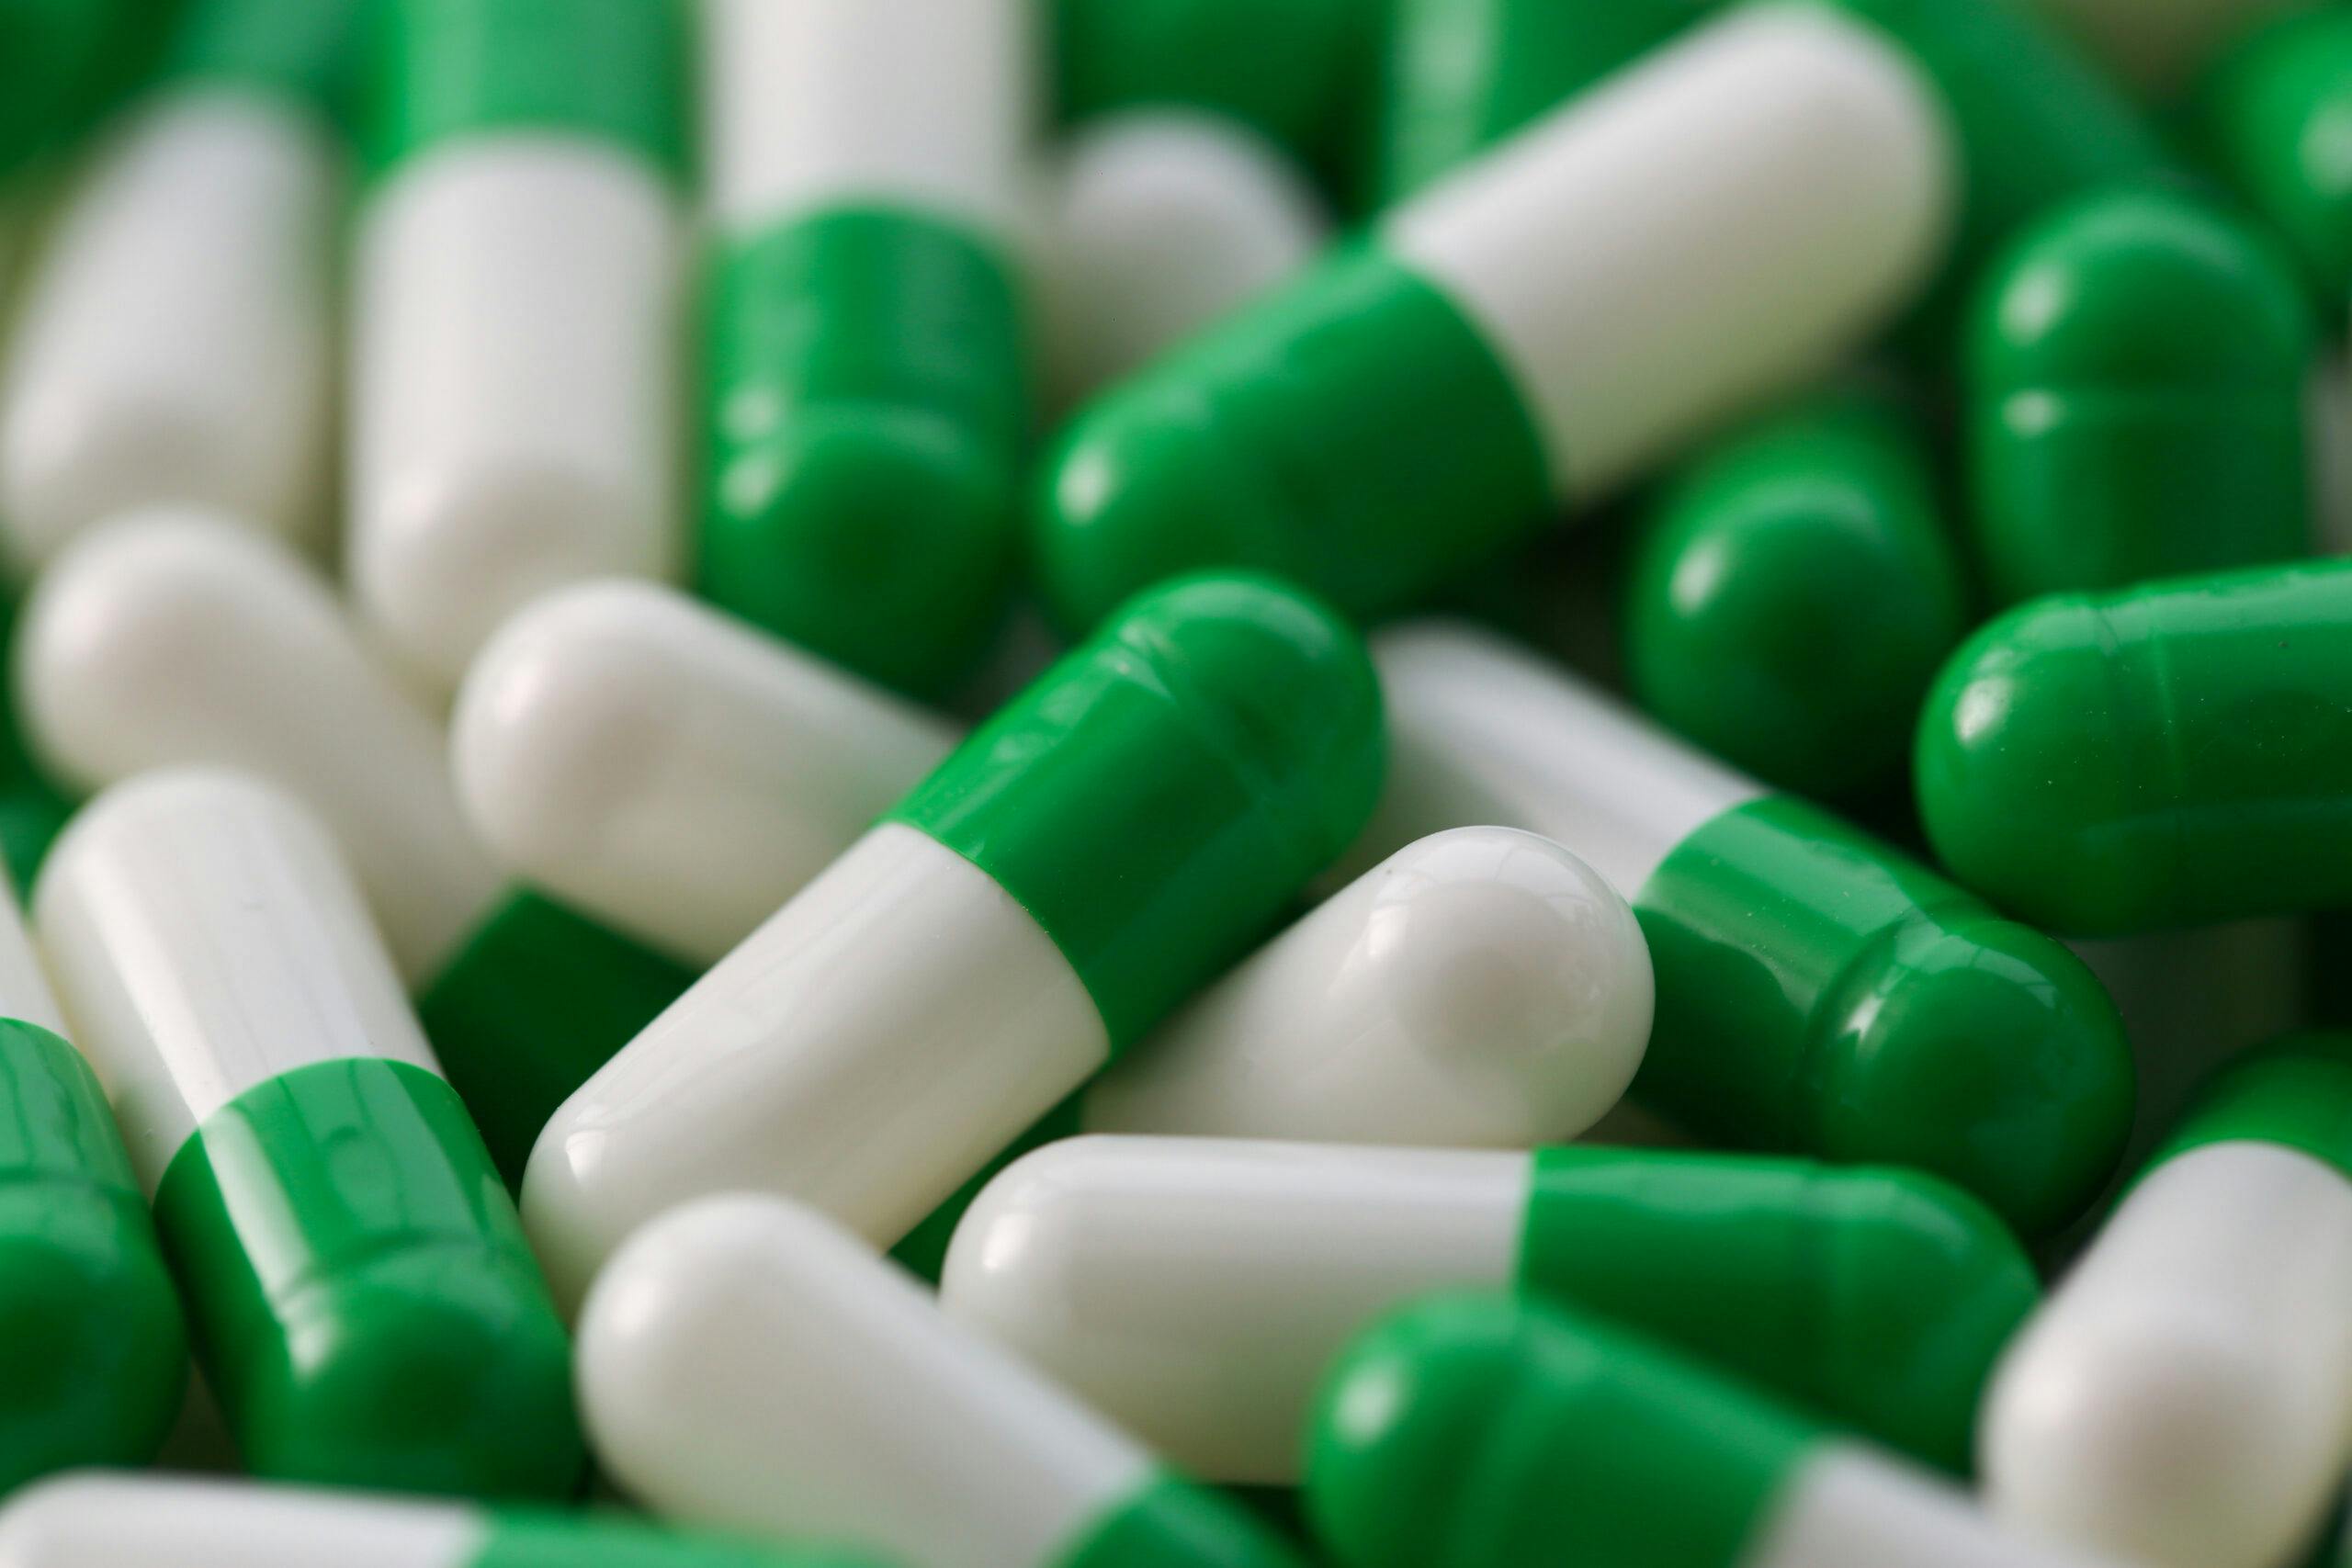 green and white Chlordiazepoxide capsule pills